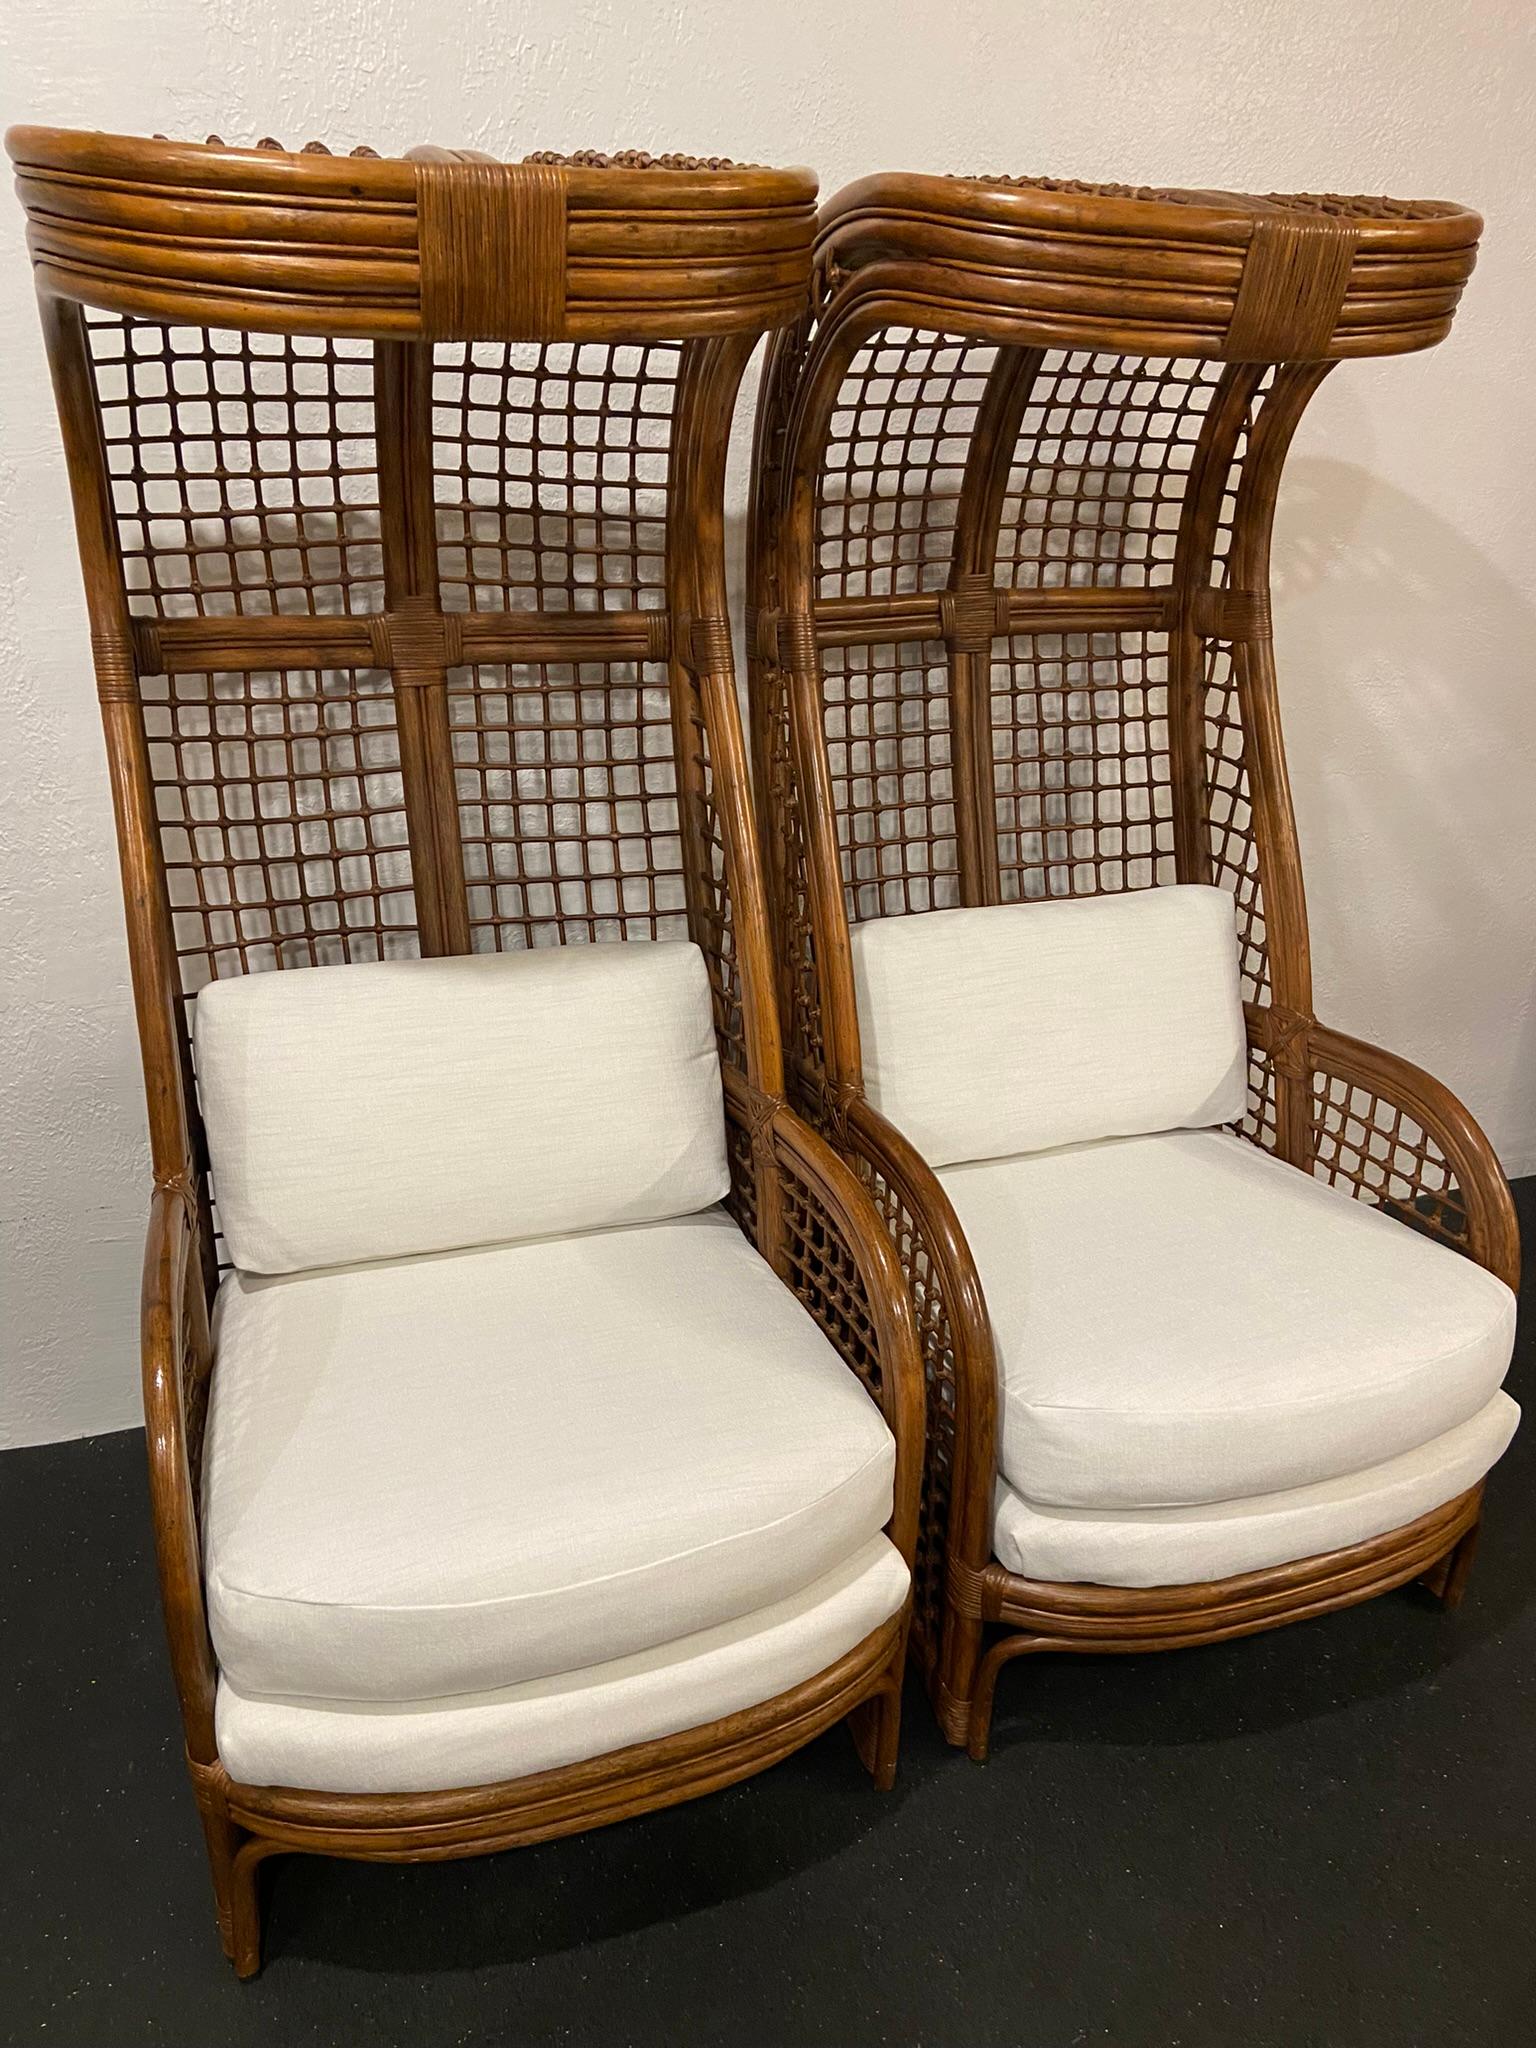 Pair of high back hooded rattan lounge chairs. Dramatic scale in extremely rare form. Newly upholstered in a chenille/velvet blend. Small areas of cane wrap that has loosened and old cane repair (please refer to photos).

Would work well in a